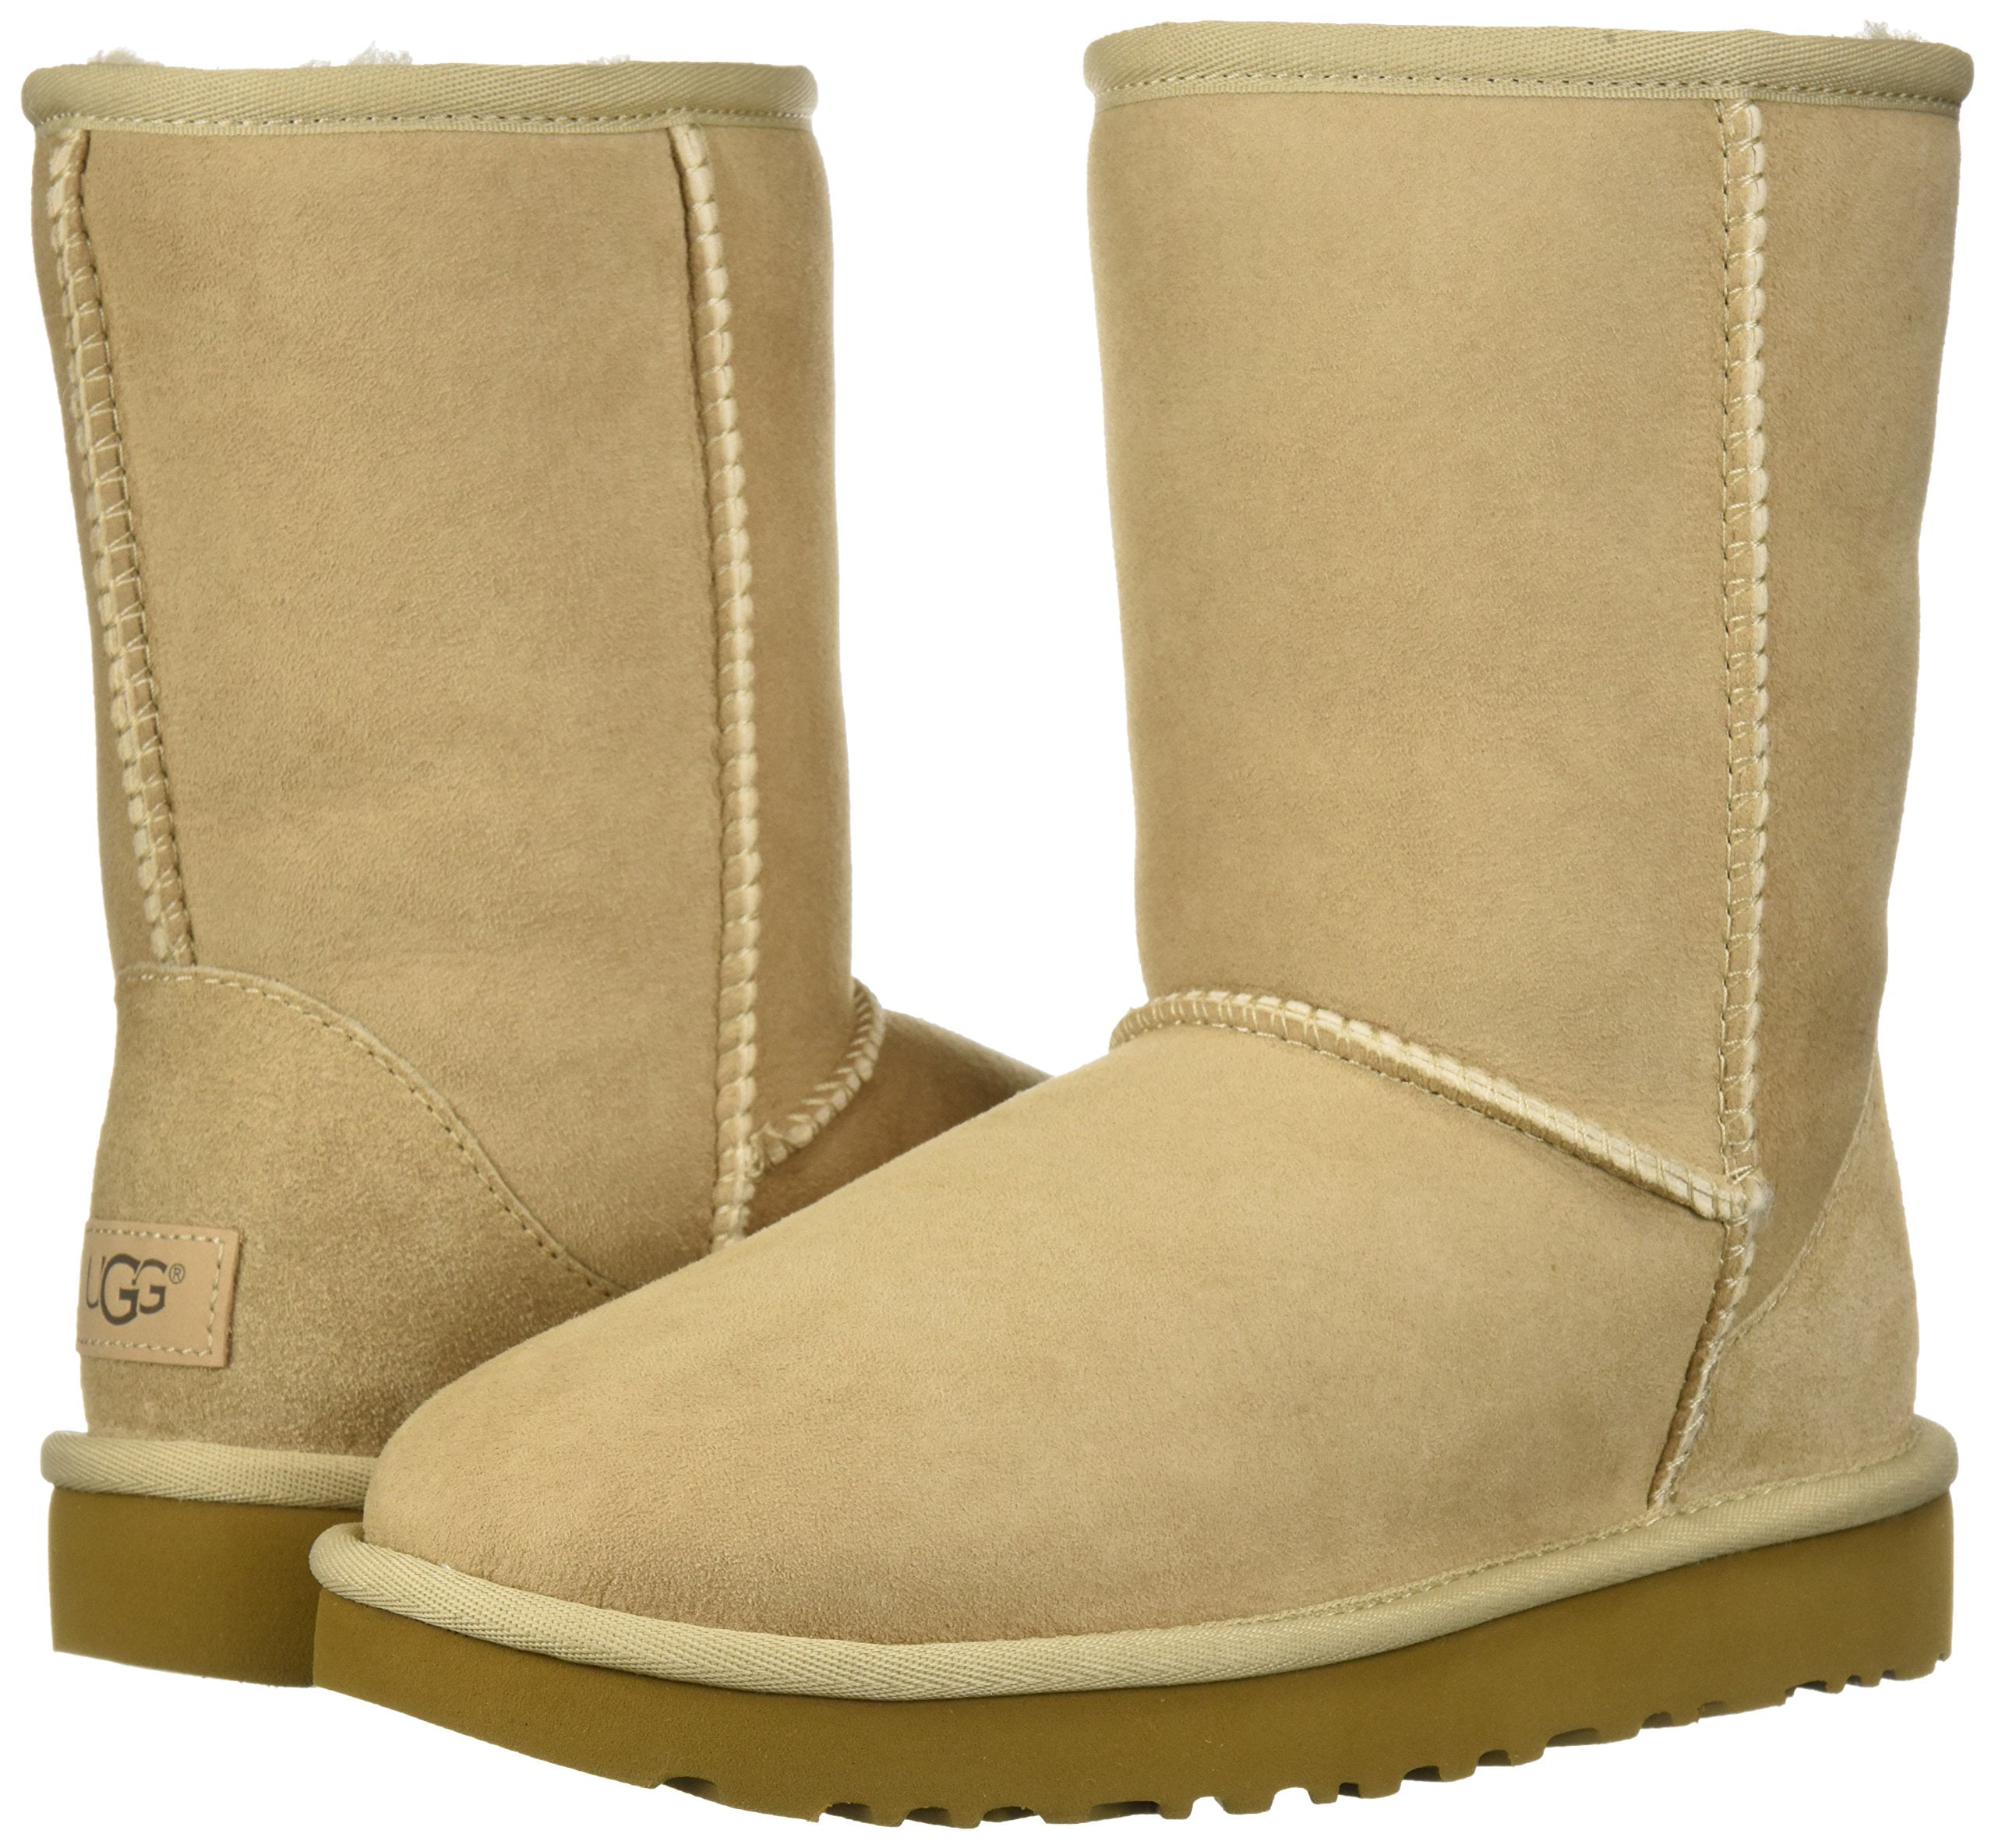 ugg boots sand color